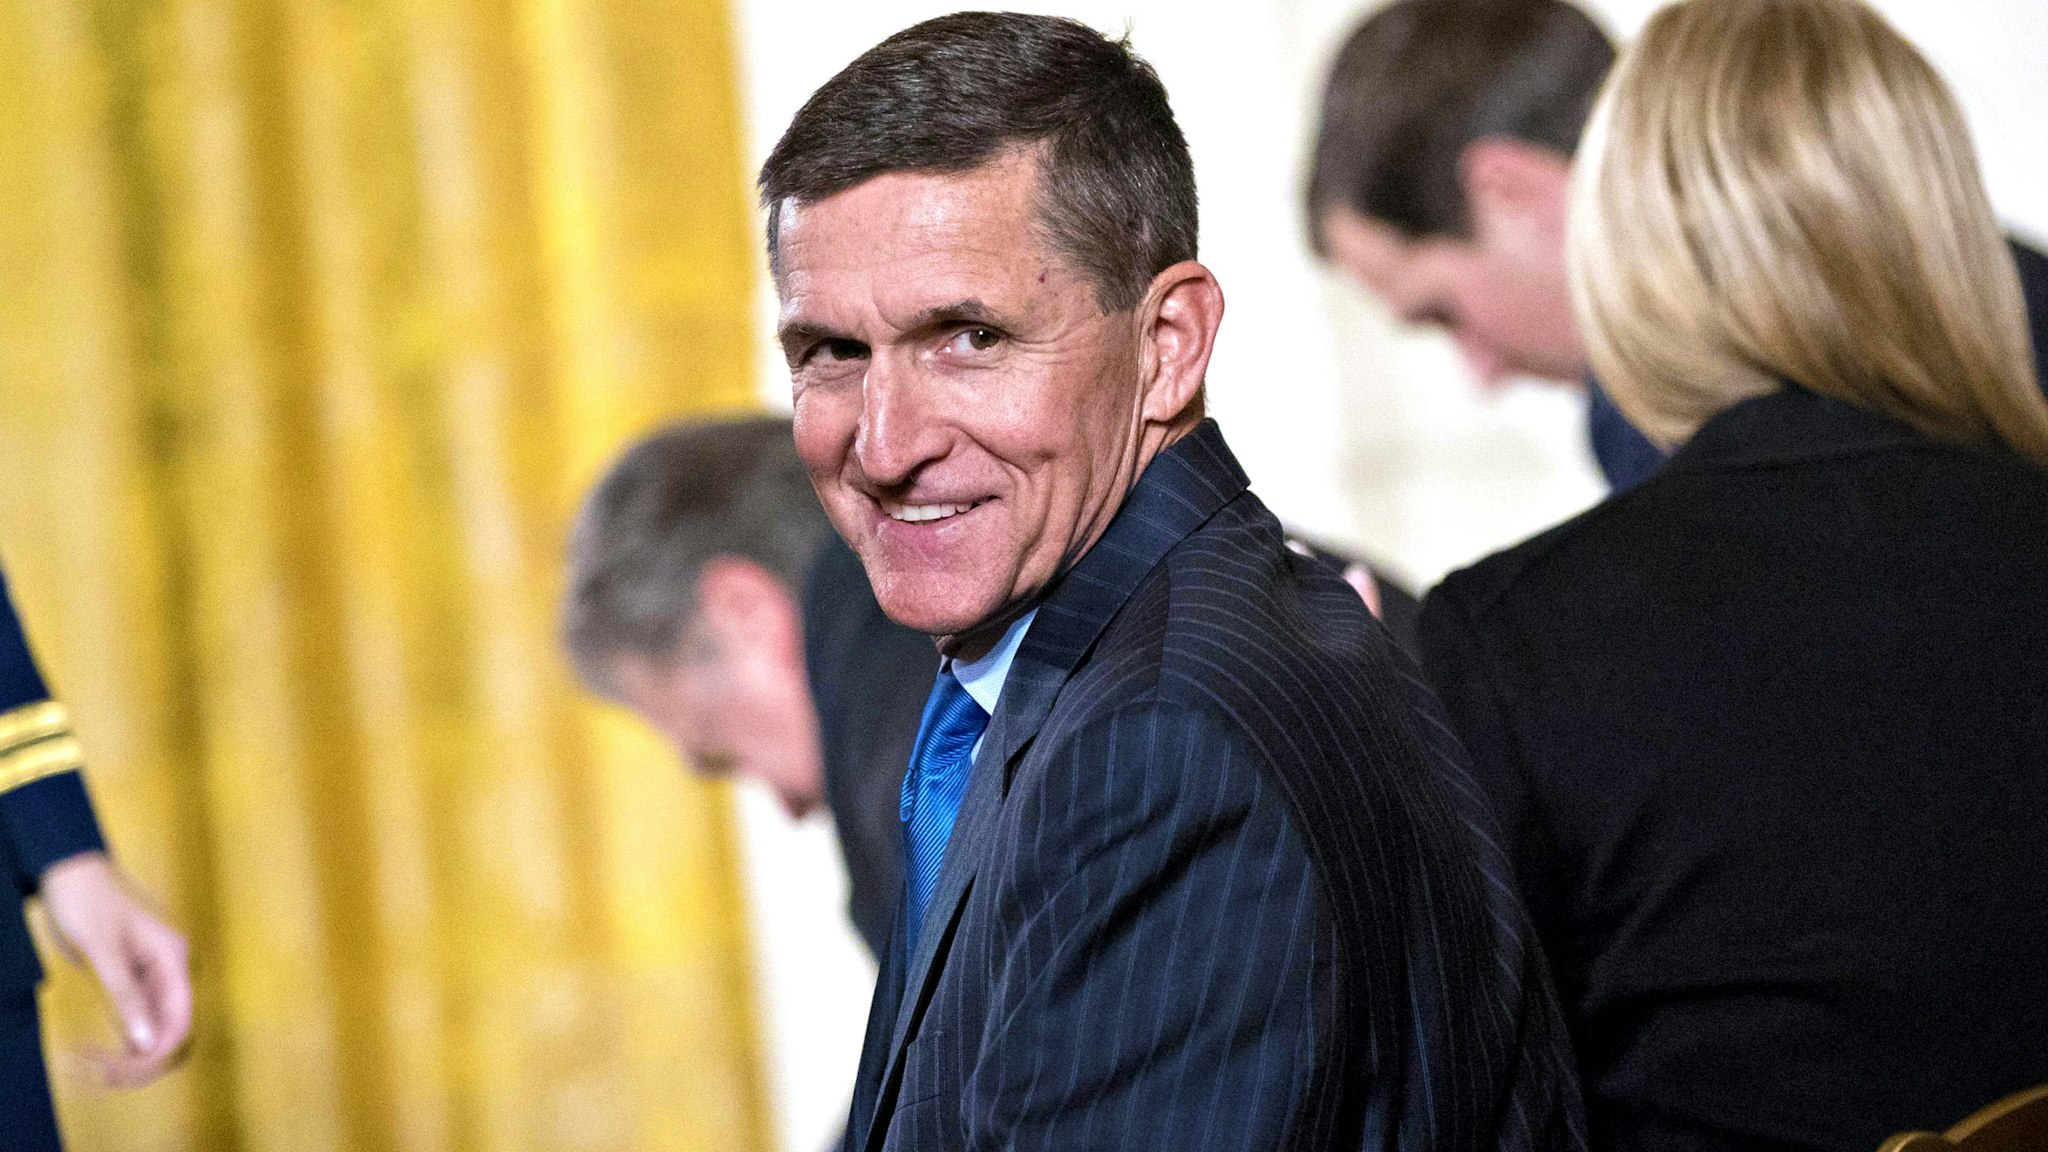 Retired Lieutenant General Michael Flynn, U.S. national security advisor, attends a swearing in ceremony of White House senior staff in the East Room of the White House in Washington, D.C., U.S., on Sunday, Jan. 22, 2017. Trump today mocked protesters who gathered for large demonstrations across the U.S. and the world on Saturday to signal discontent with his leadership, but later offered a more conciliatory tone, saying he recognized such marches as a hallmark of our democracy.